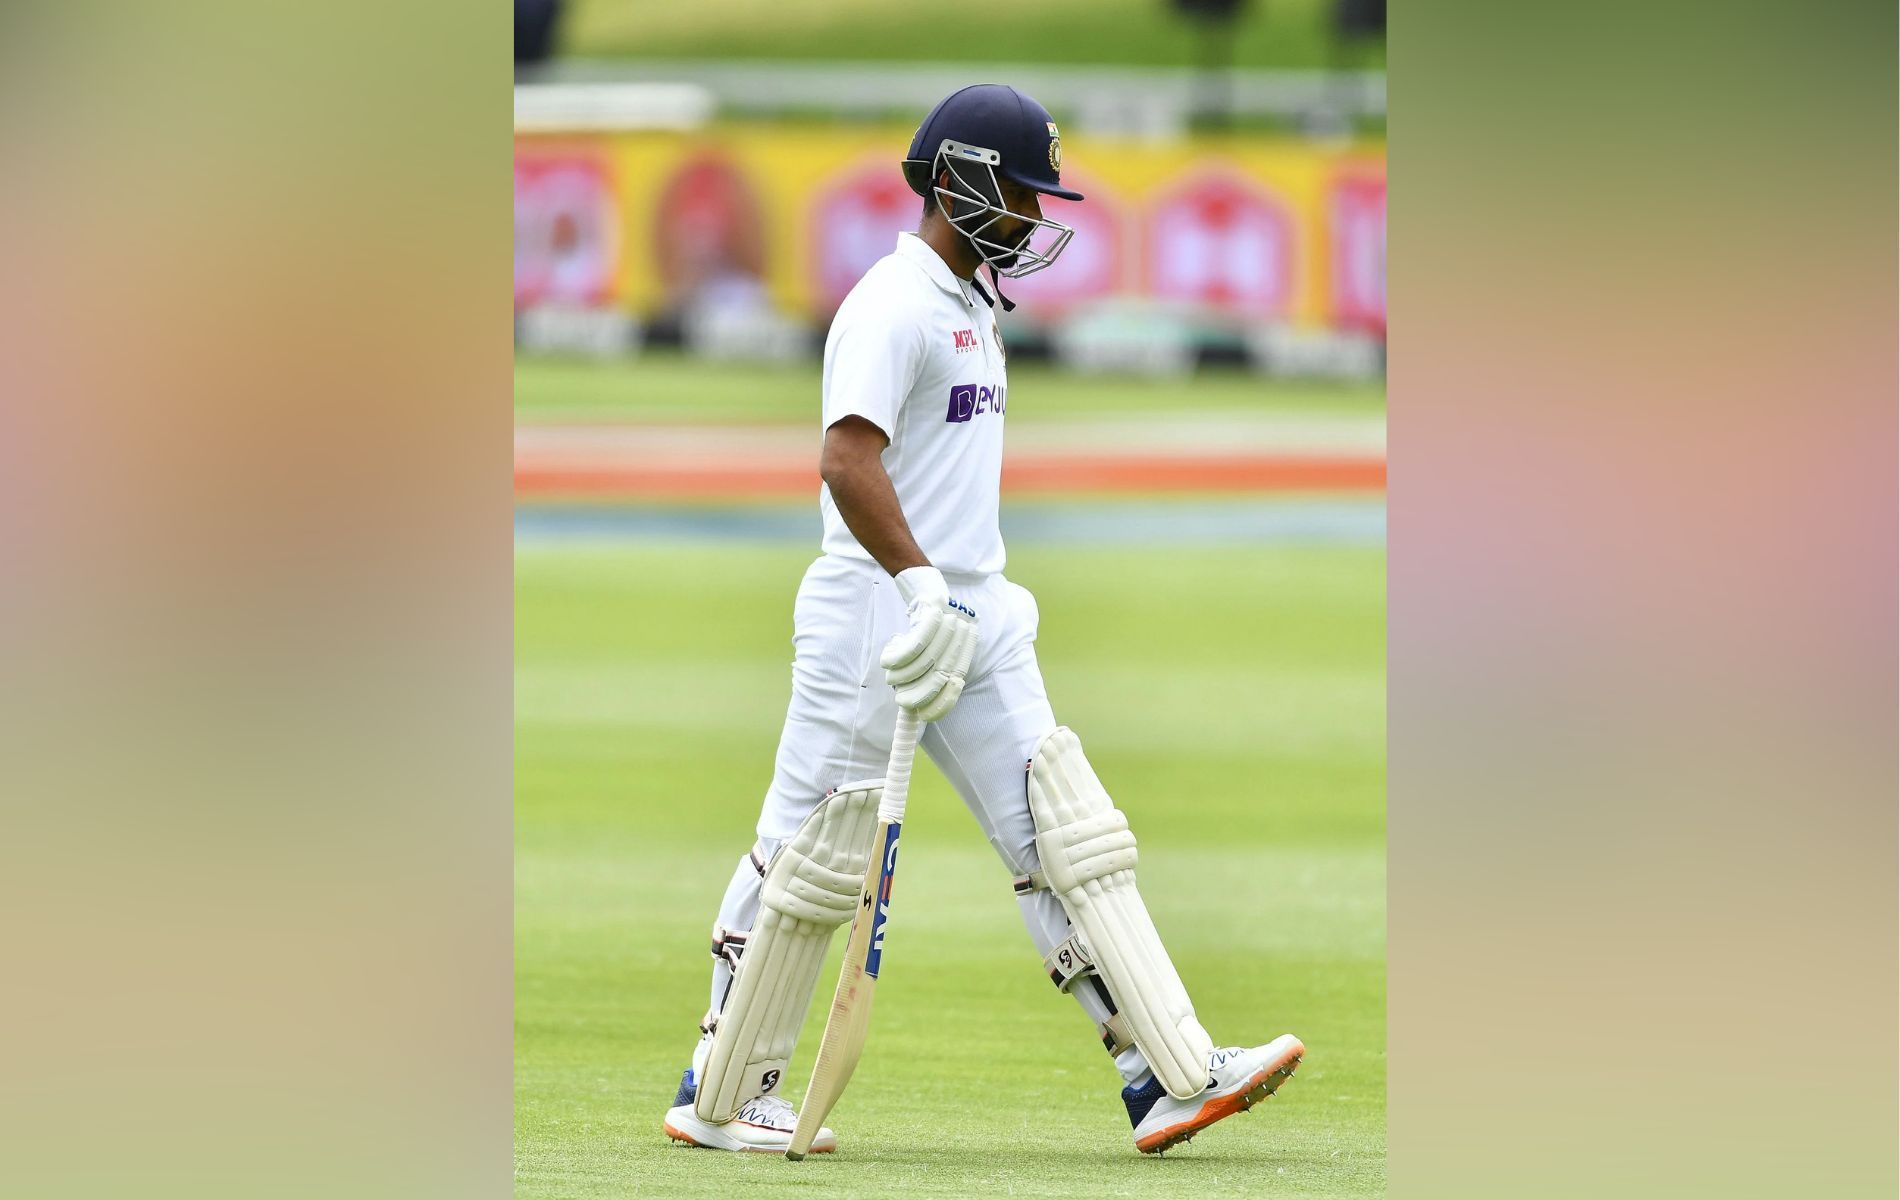 Ajinkya Rahane scored just a single run before being dismissed in the second innings in Cape Town.